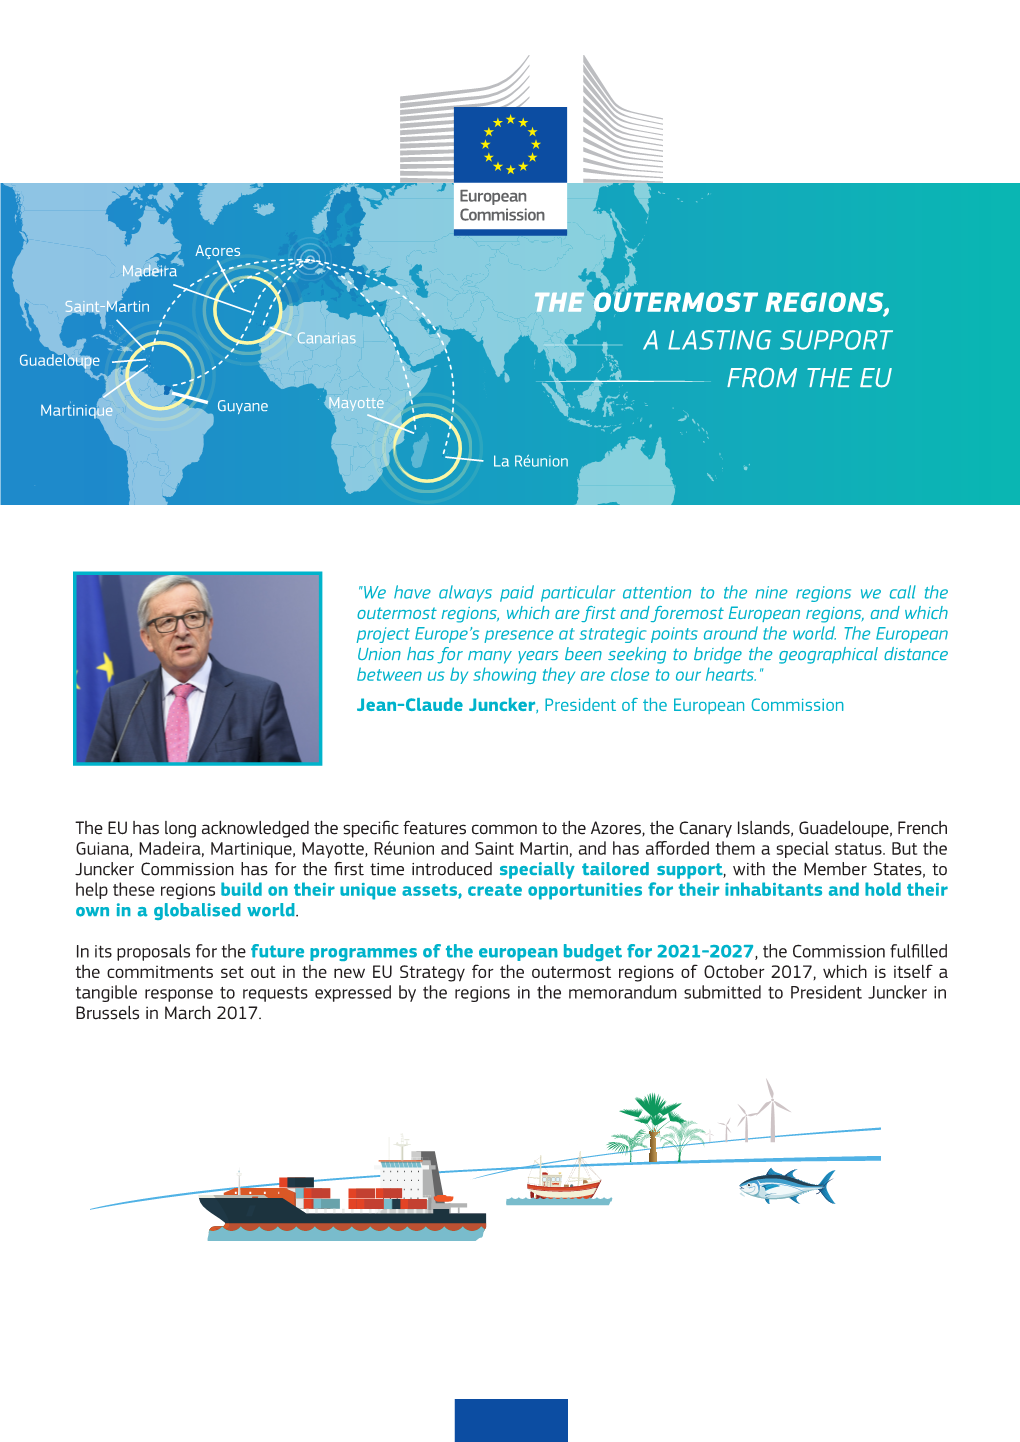 The Outermost Regions, a Lasting Support from the Eu